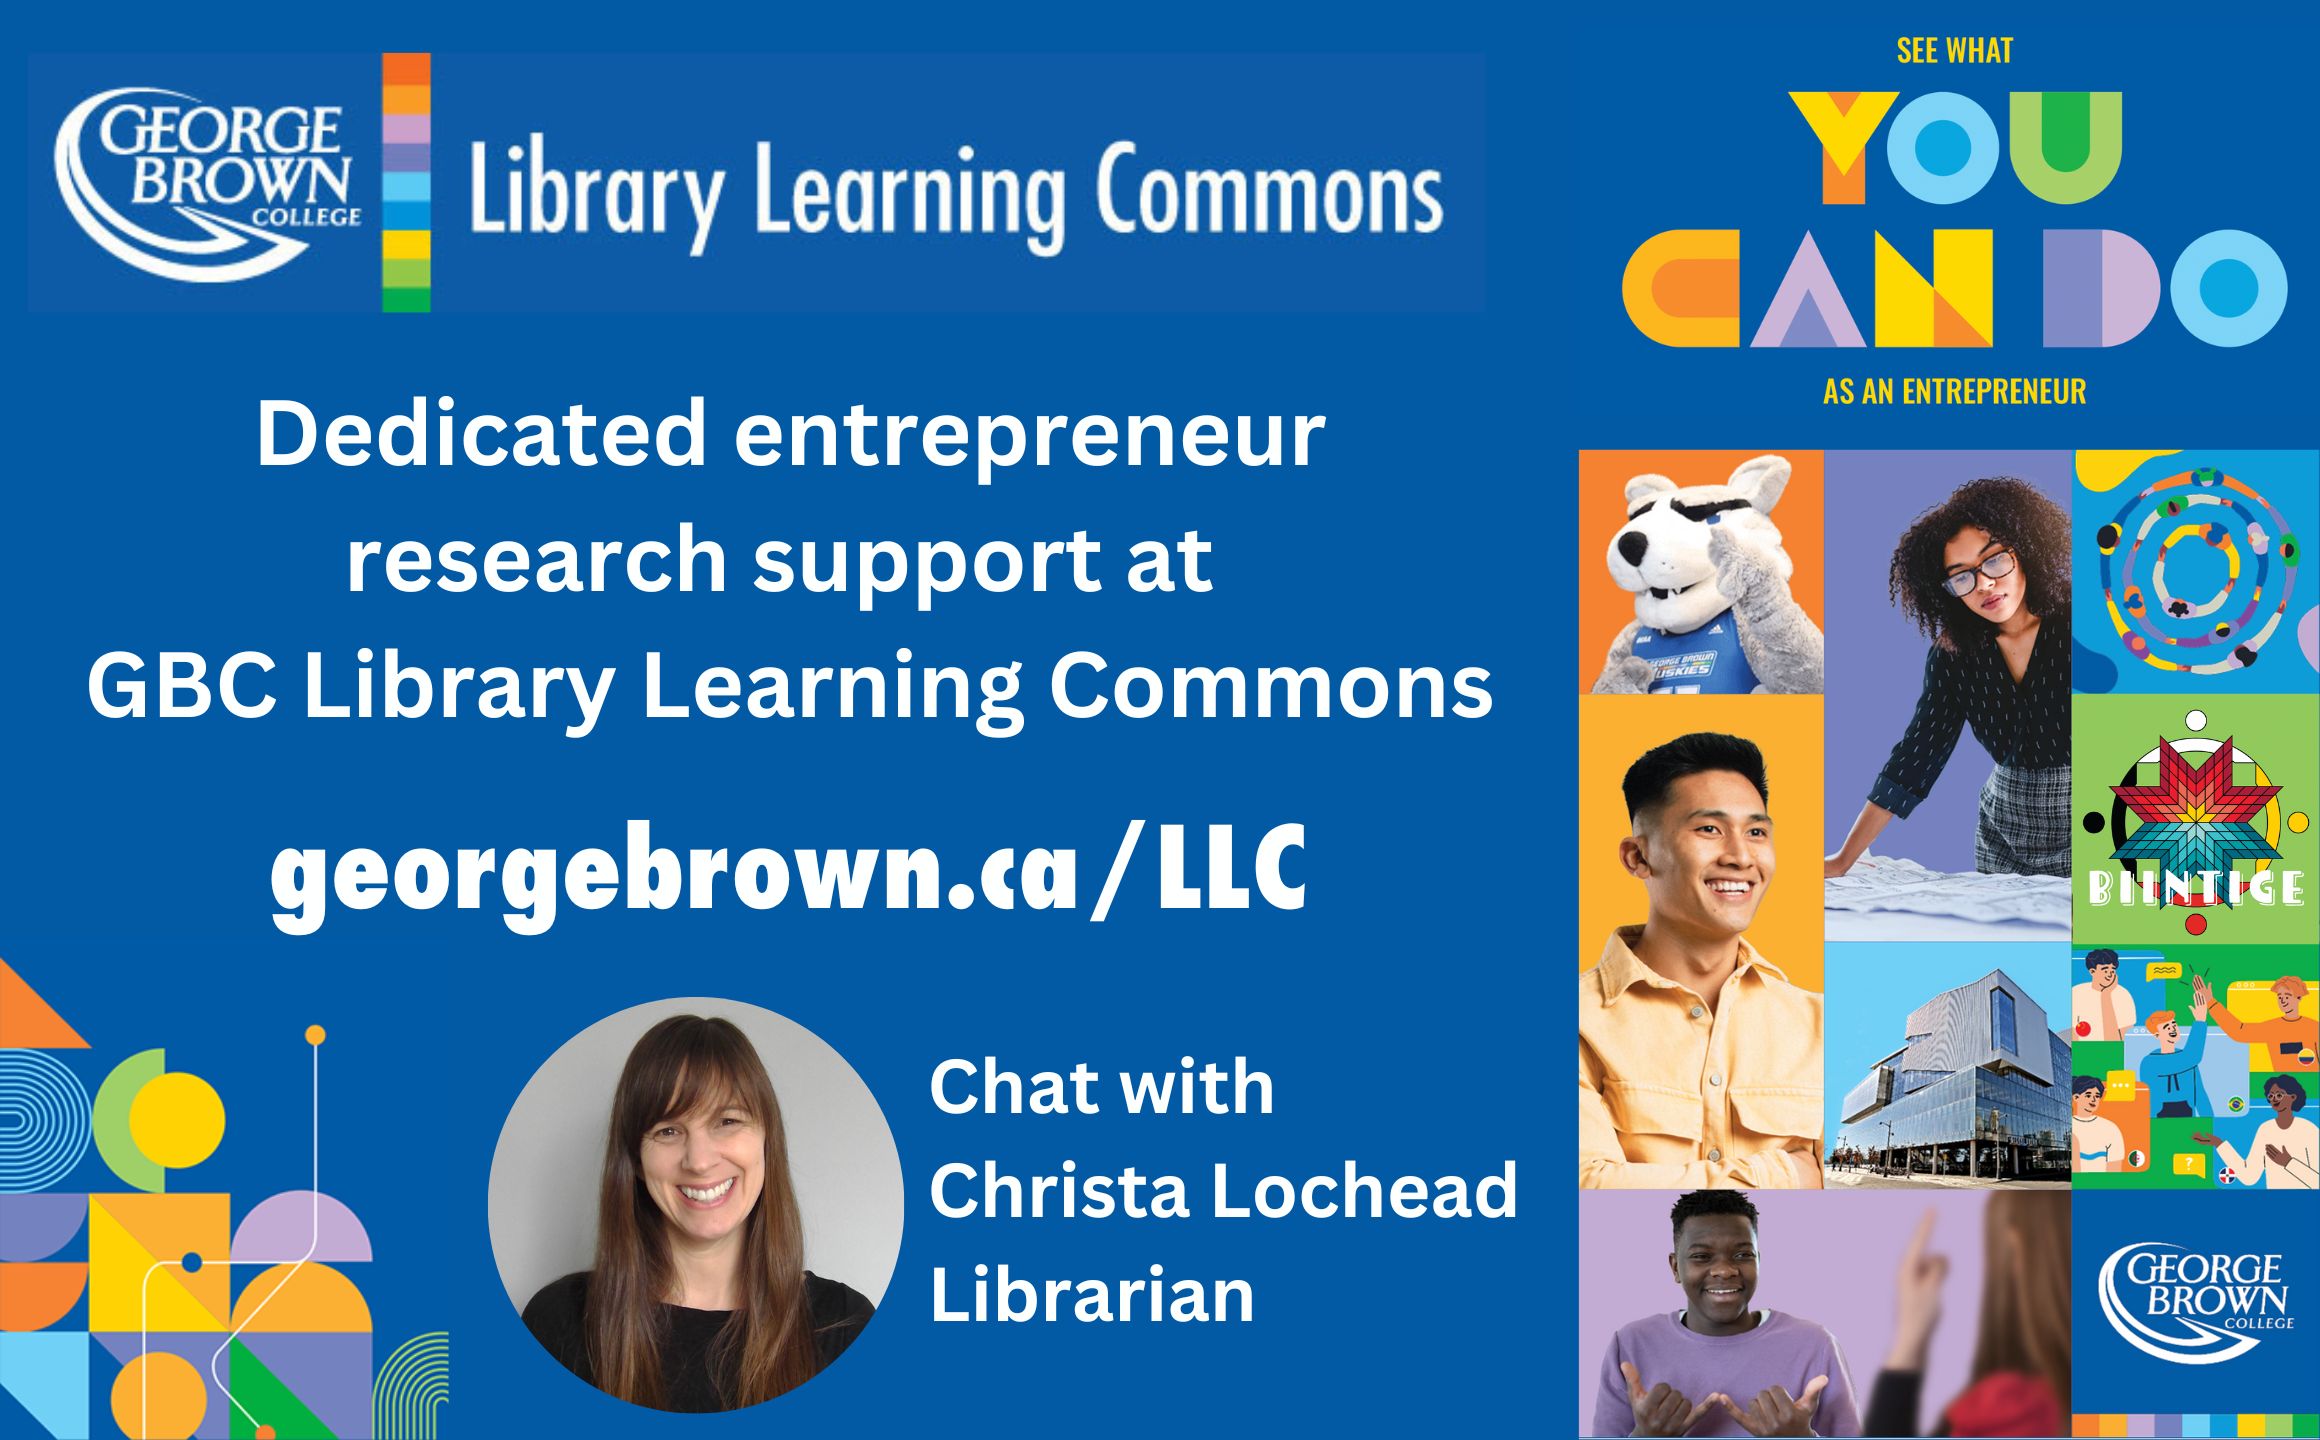 Image to promote GBC Library learning Commons dedicated support for entrepreneurs